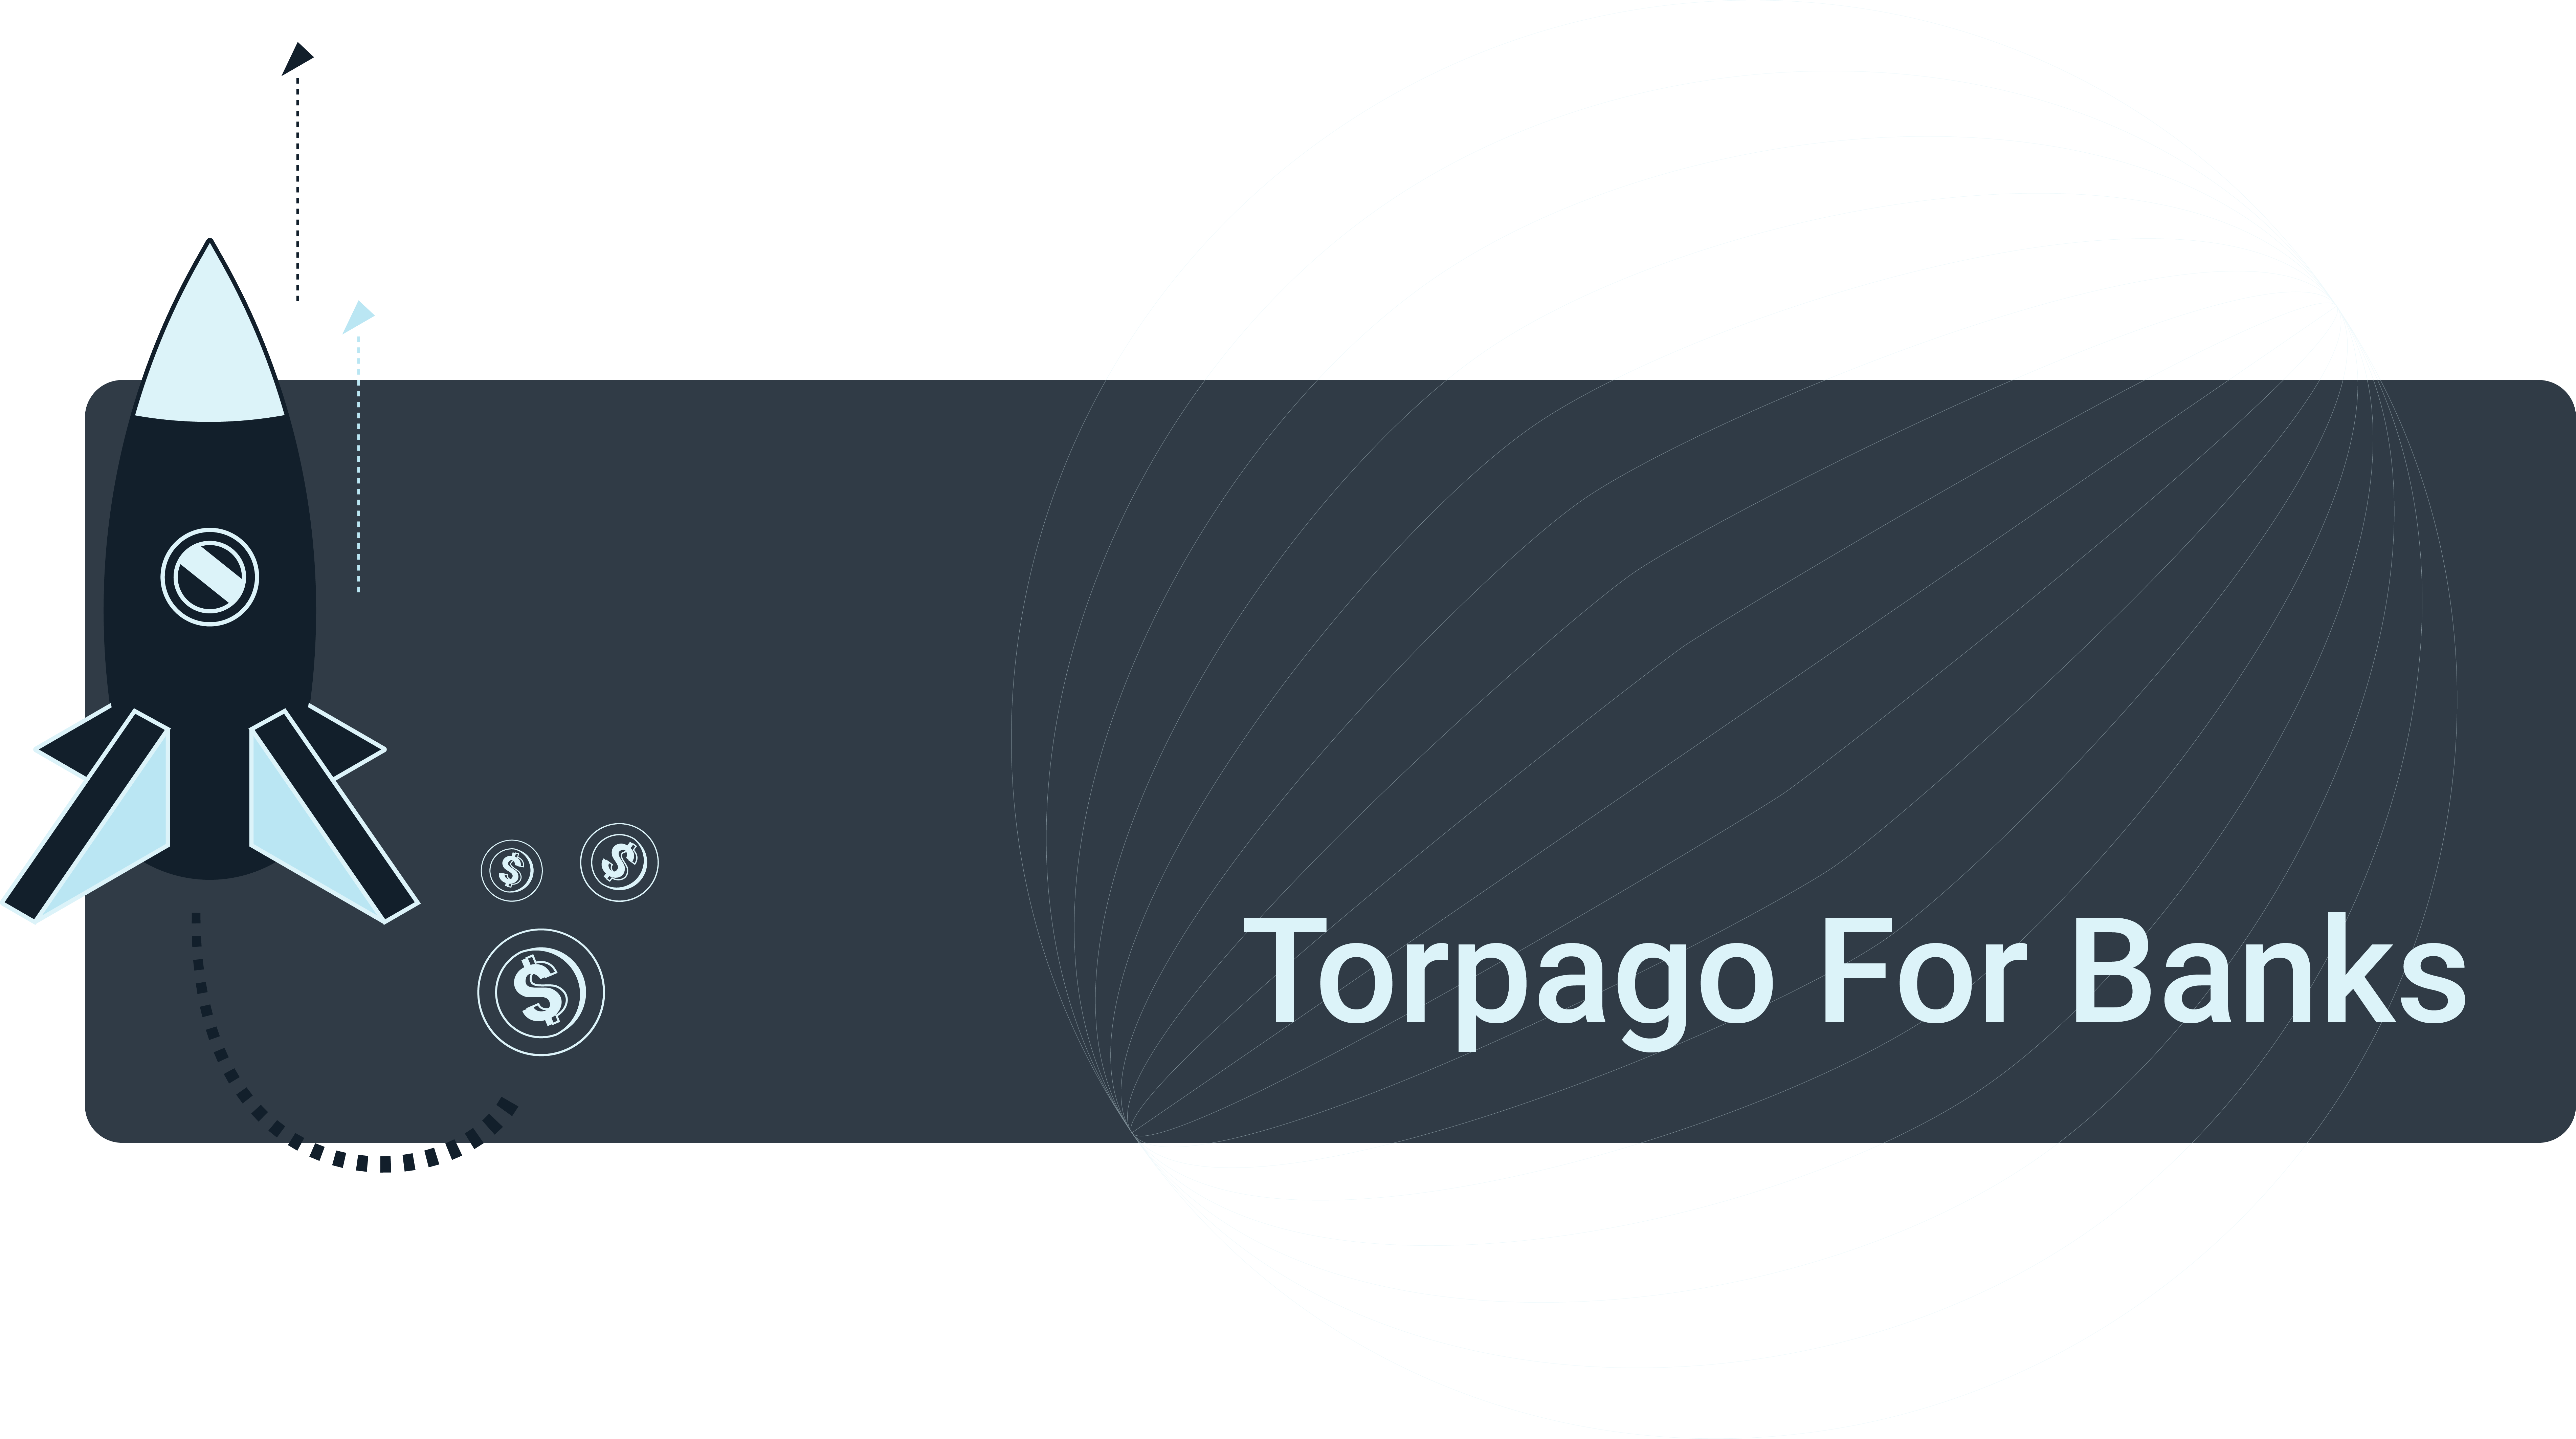 Torpago for banks